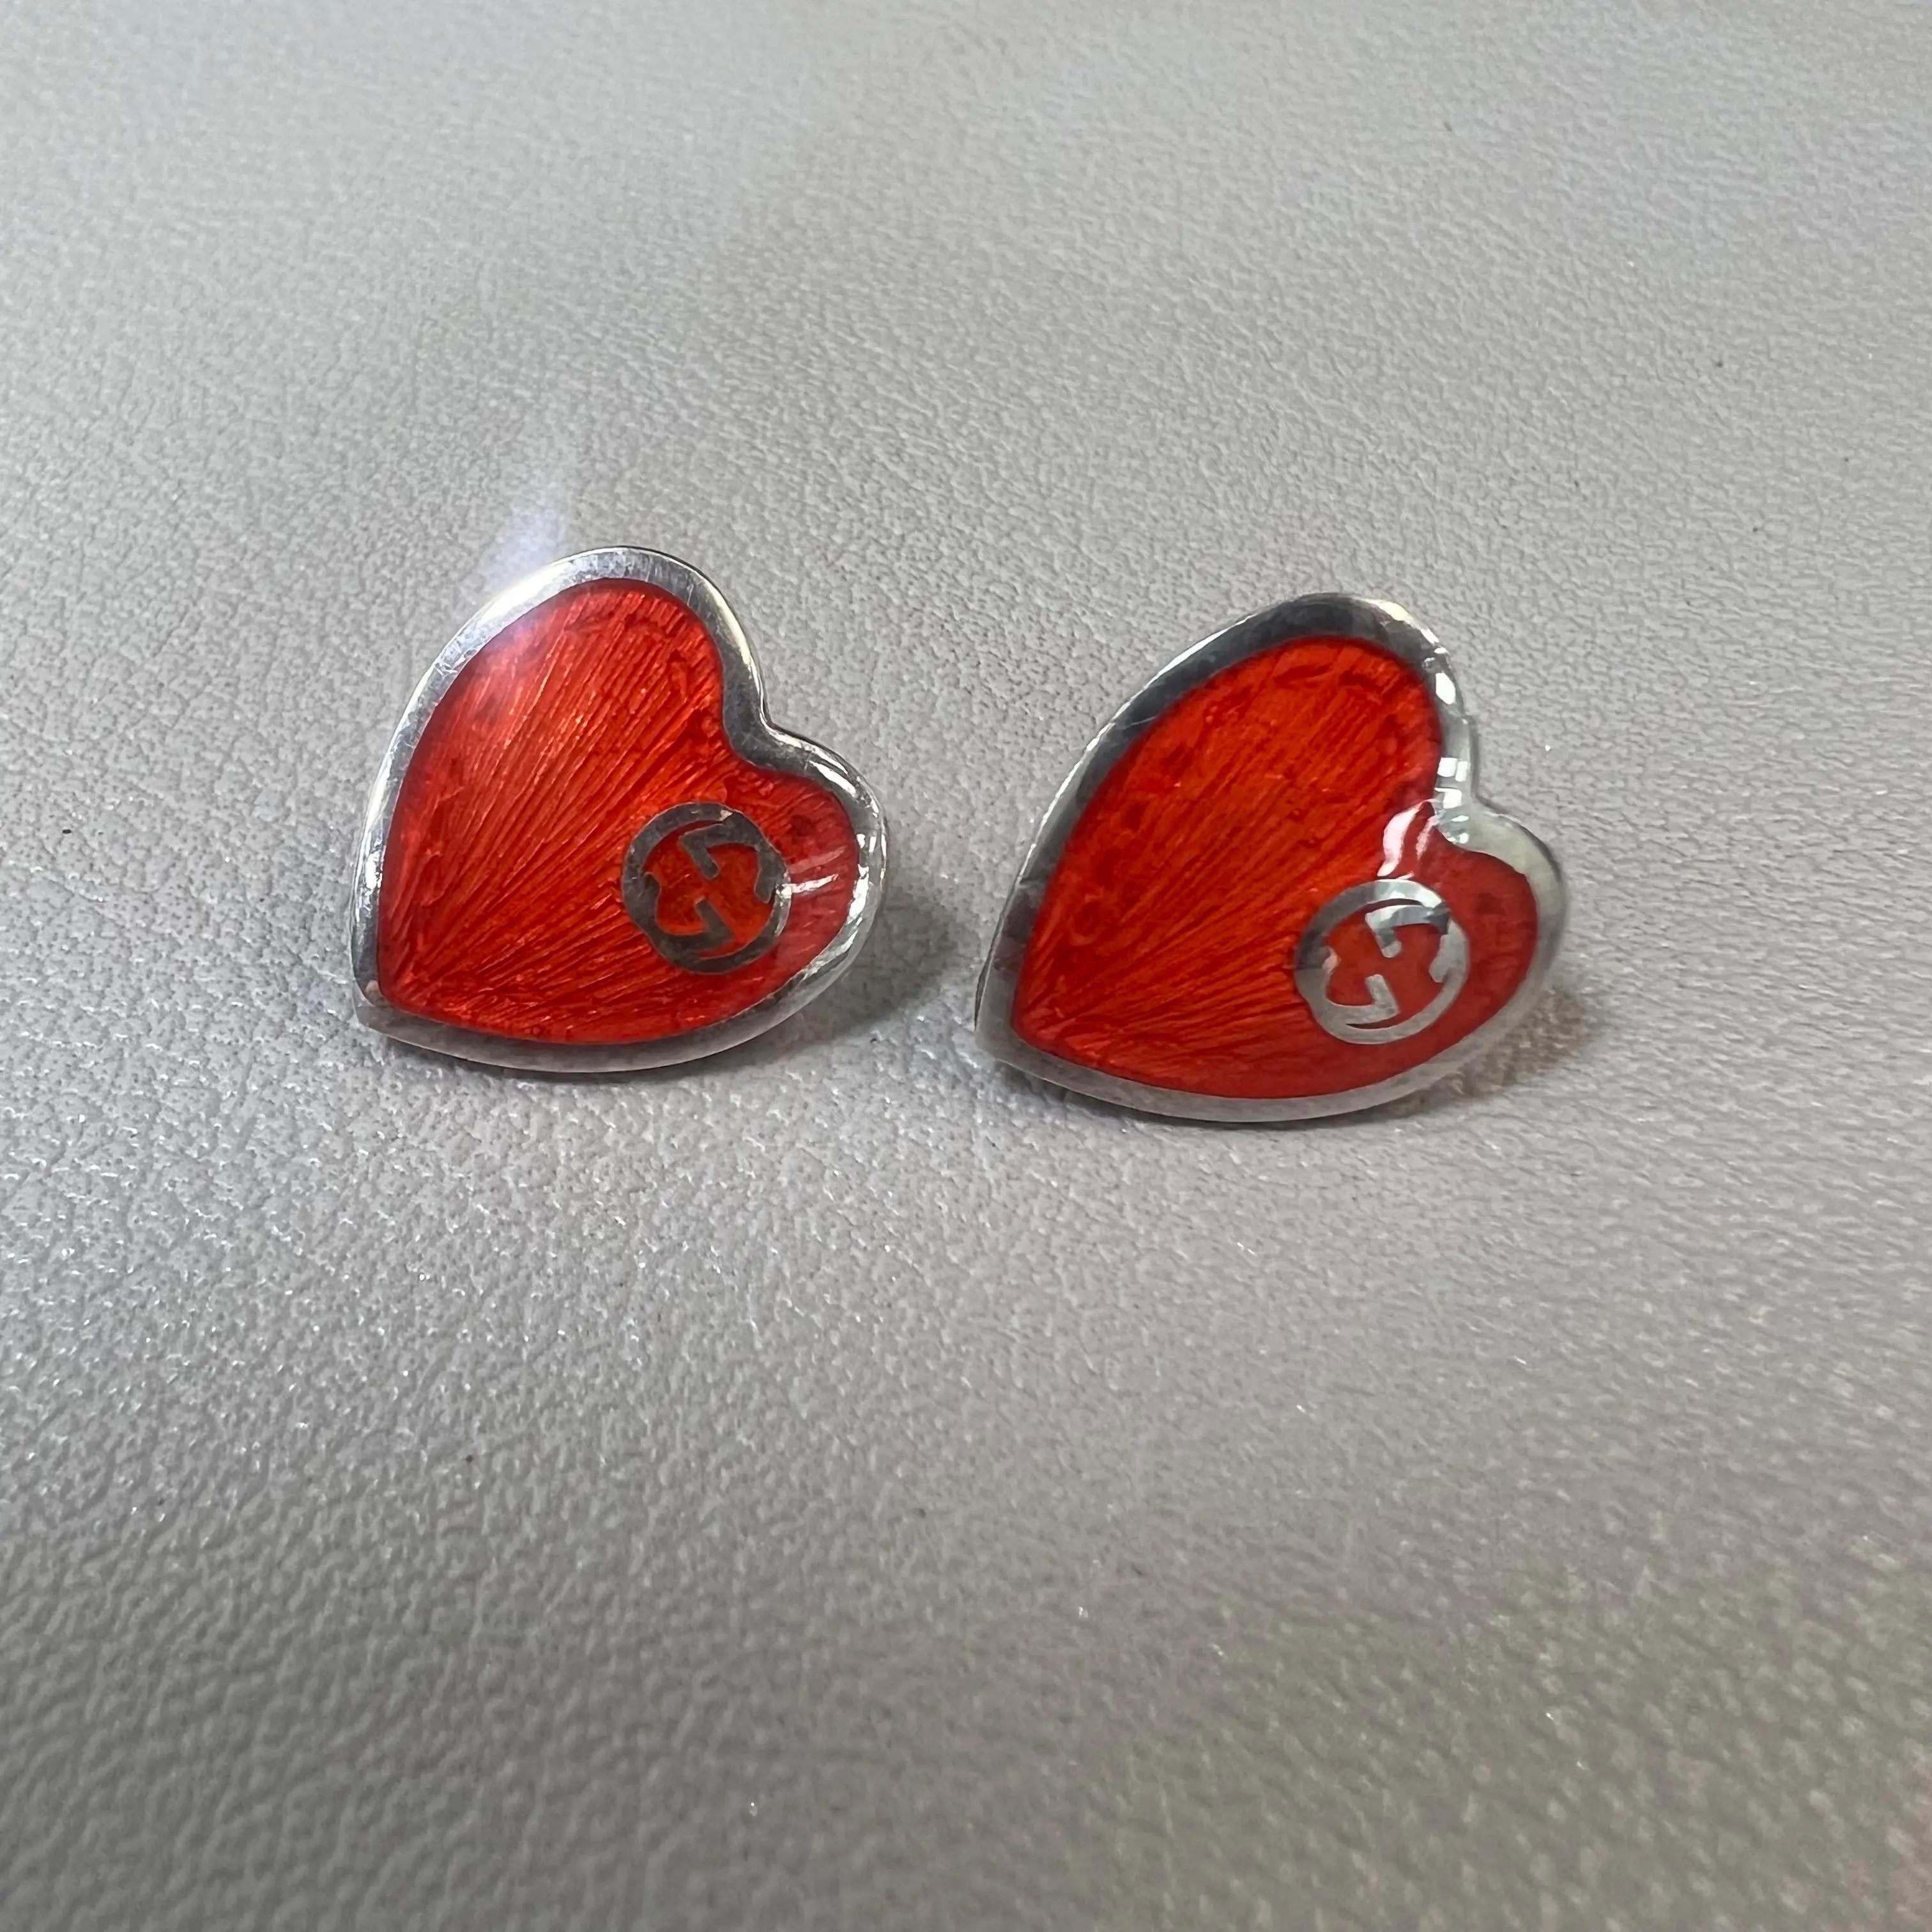 GUCCI red enamel interlocking G heart stud earrings. Crafted in 925 sterling silver. Earring size: 12mm x 13mm. Total weight: 3.10 grams. Push back closure. Comes with one Gucci stamped push back closure and one regular. Made in Italy. Excellent